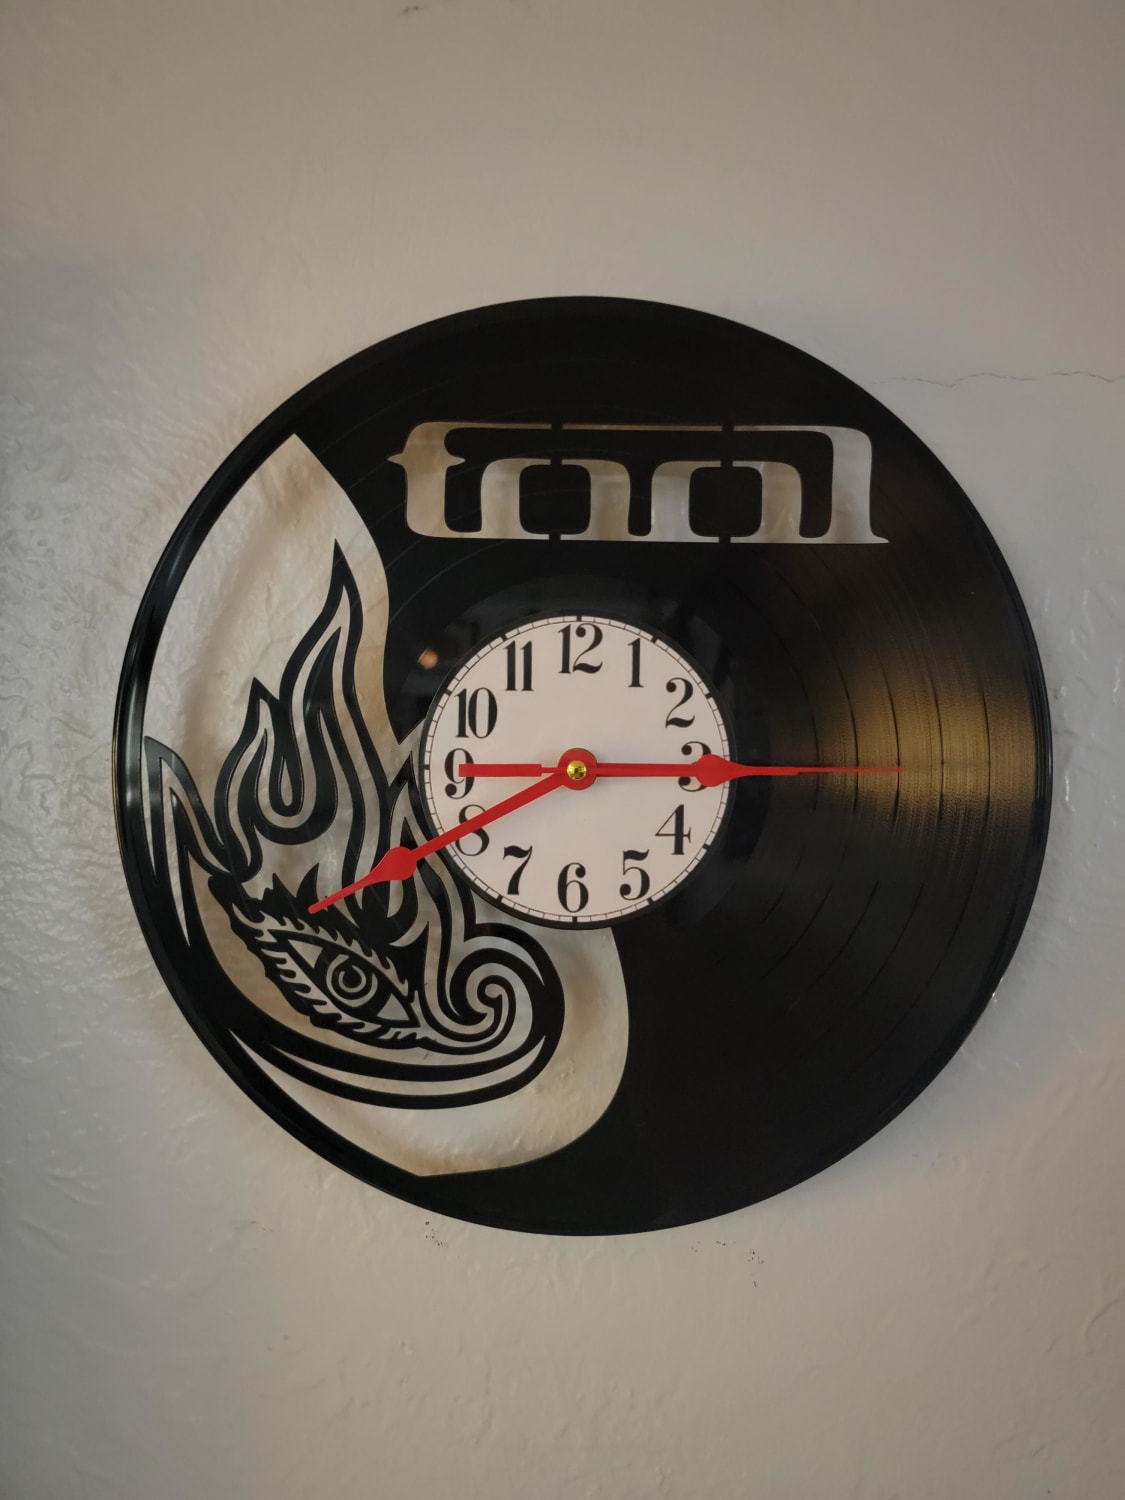 New clock I got last night at our local State Fair.